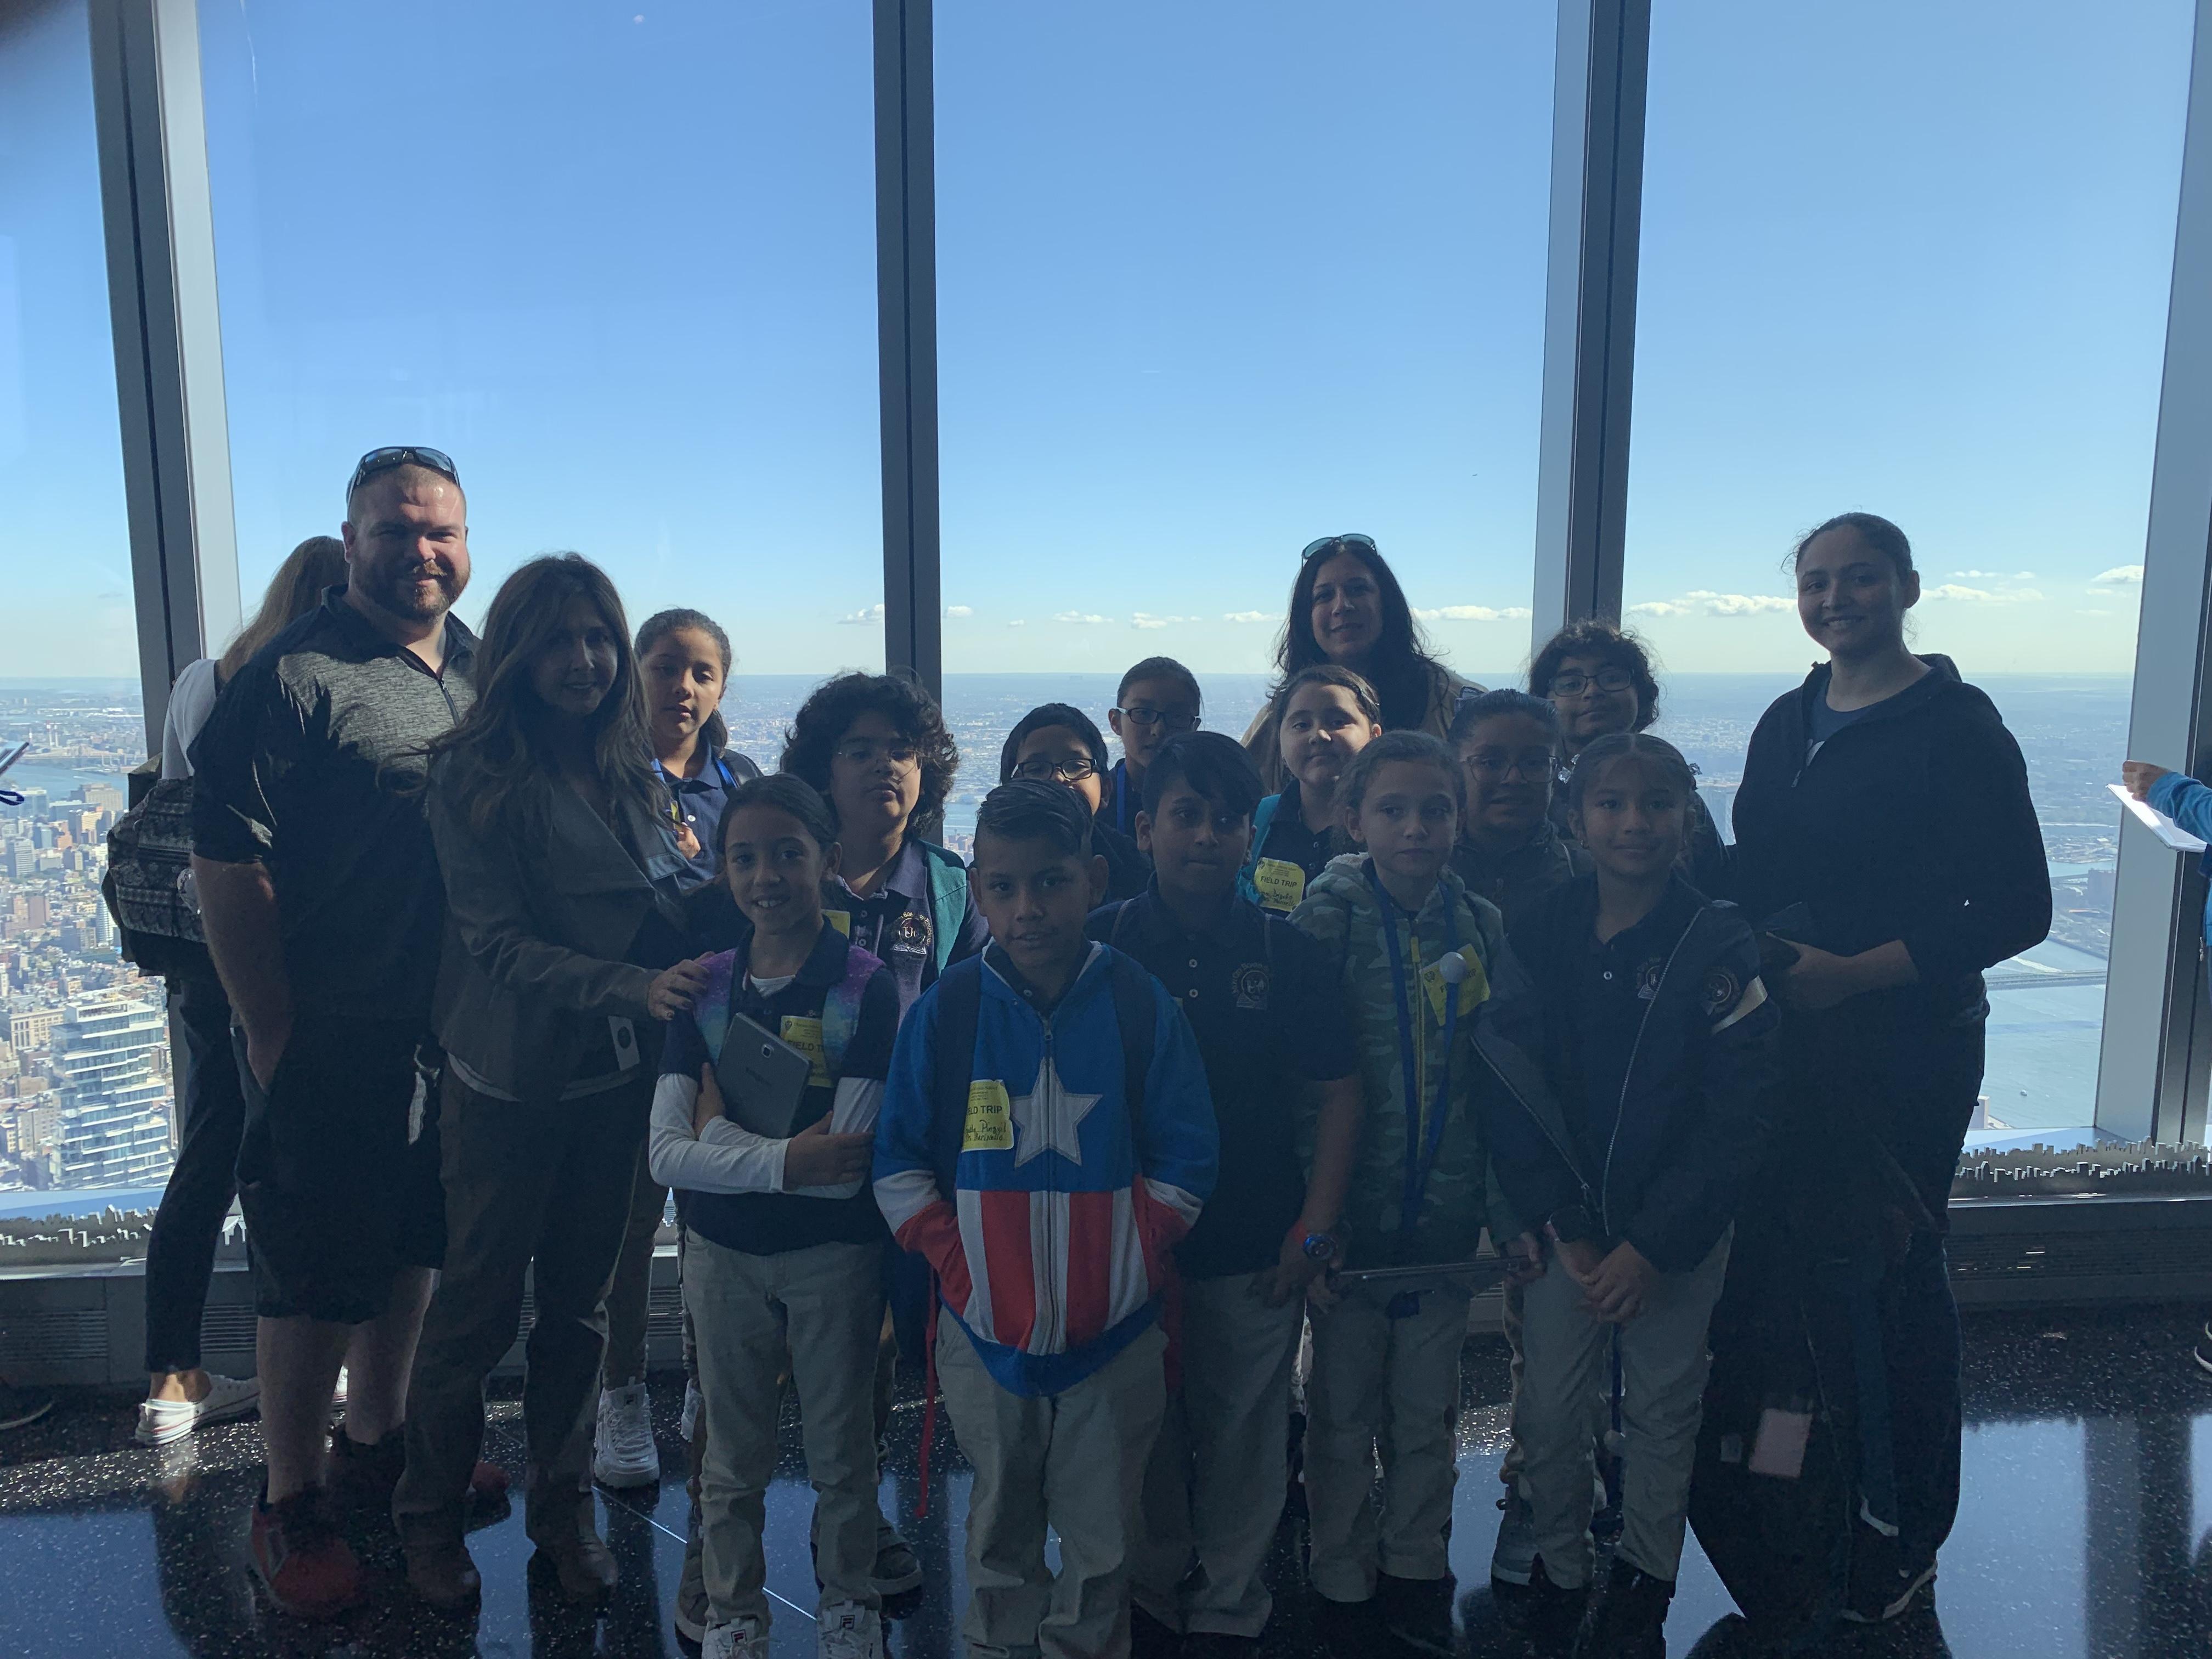 Mr. Blake, Marinello, Ms. Logothetis, & Ms. Cintron and several students standing in front of the window with the NYC background